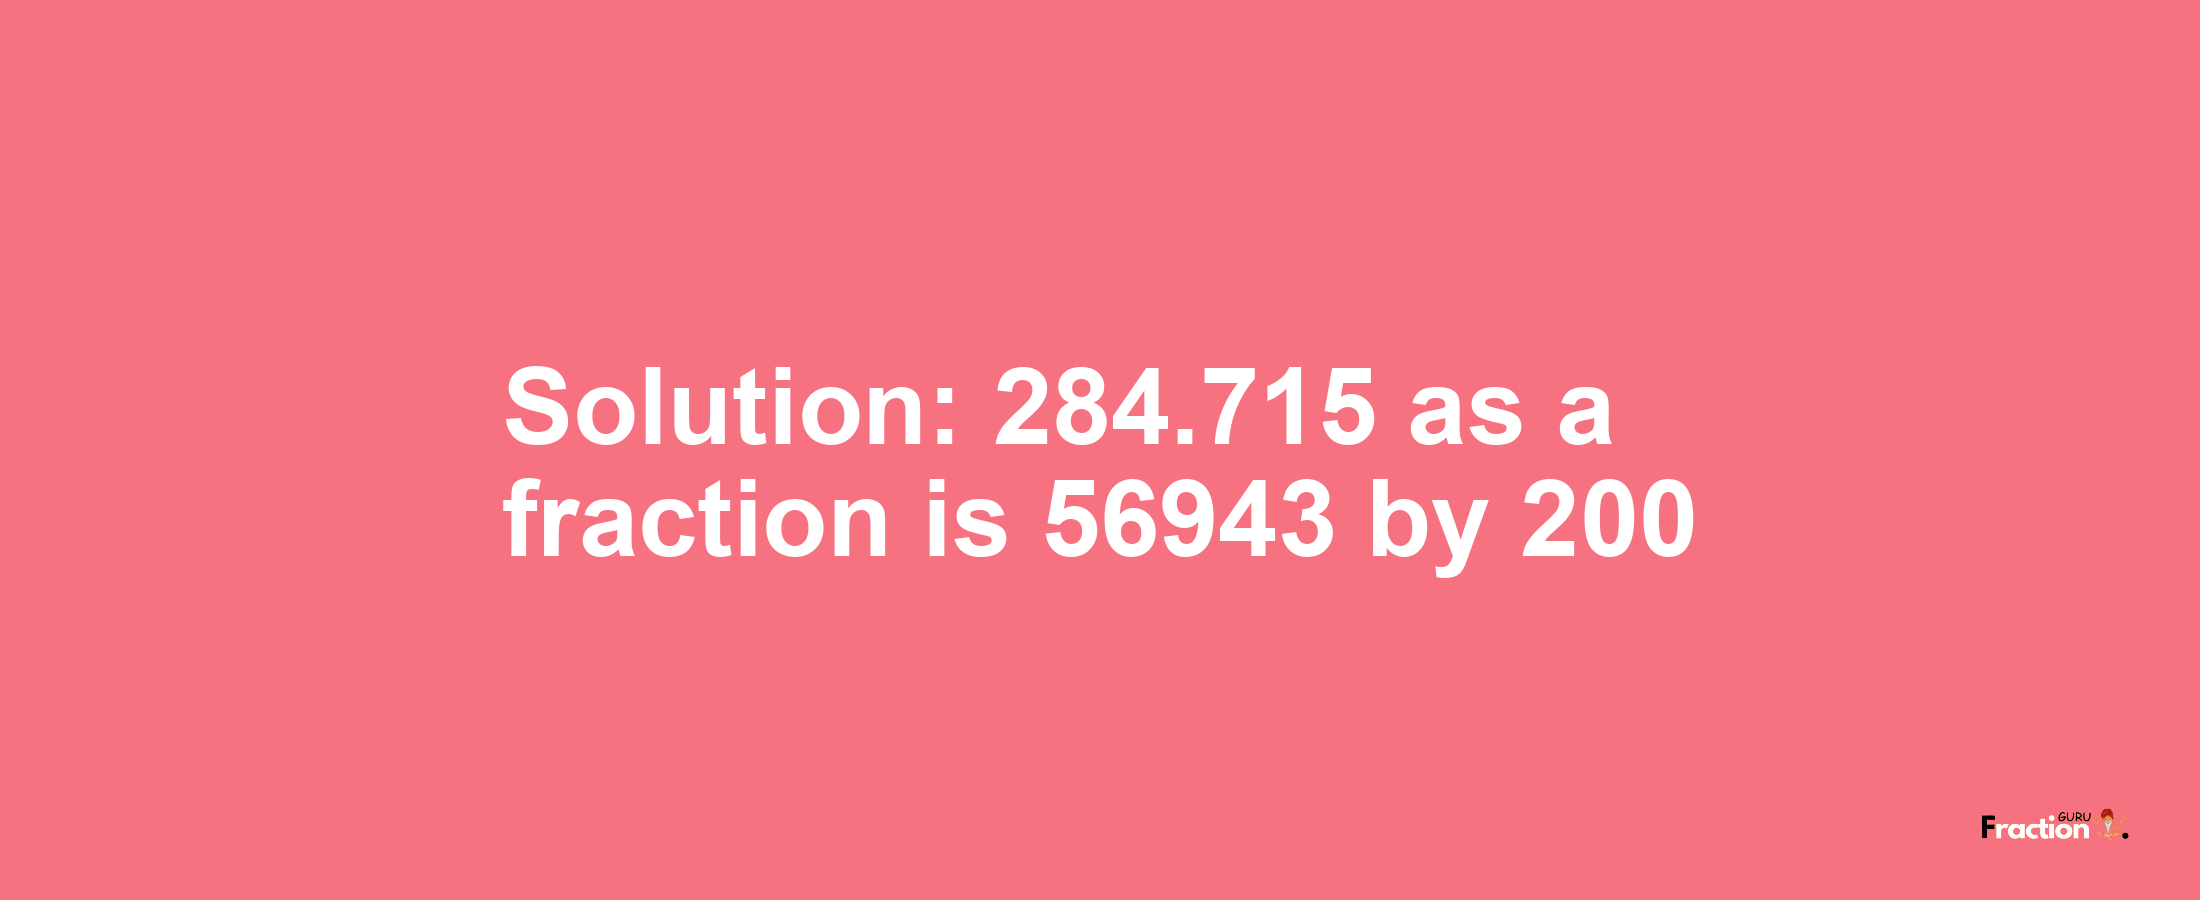 Solution:284.715 as a fraction is 56943/200